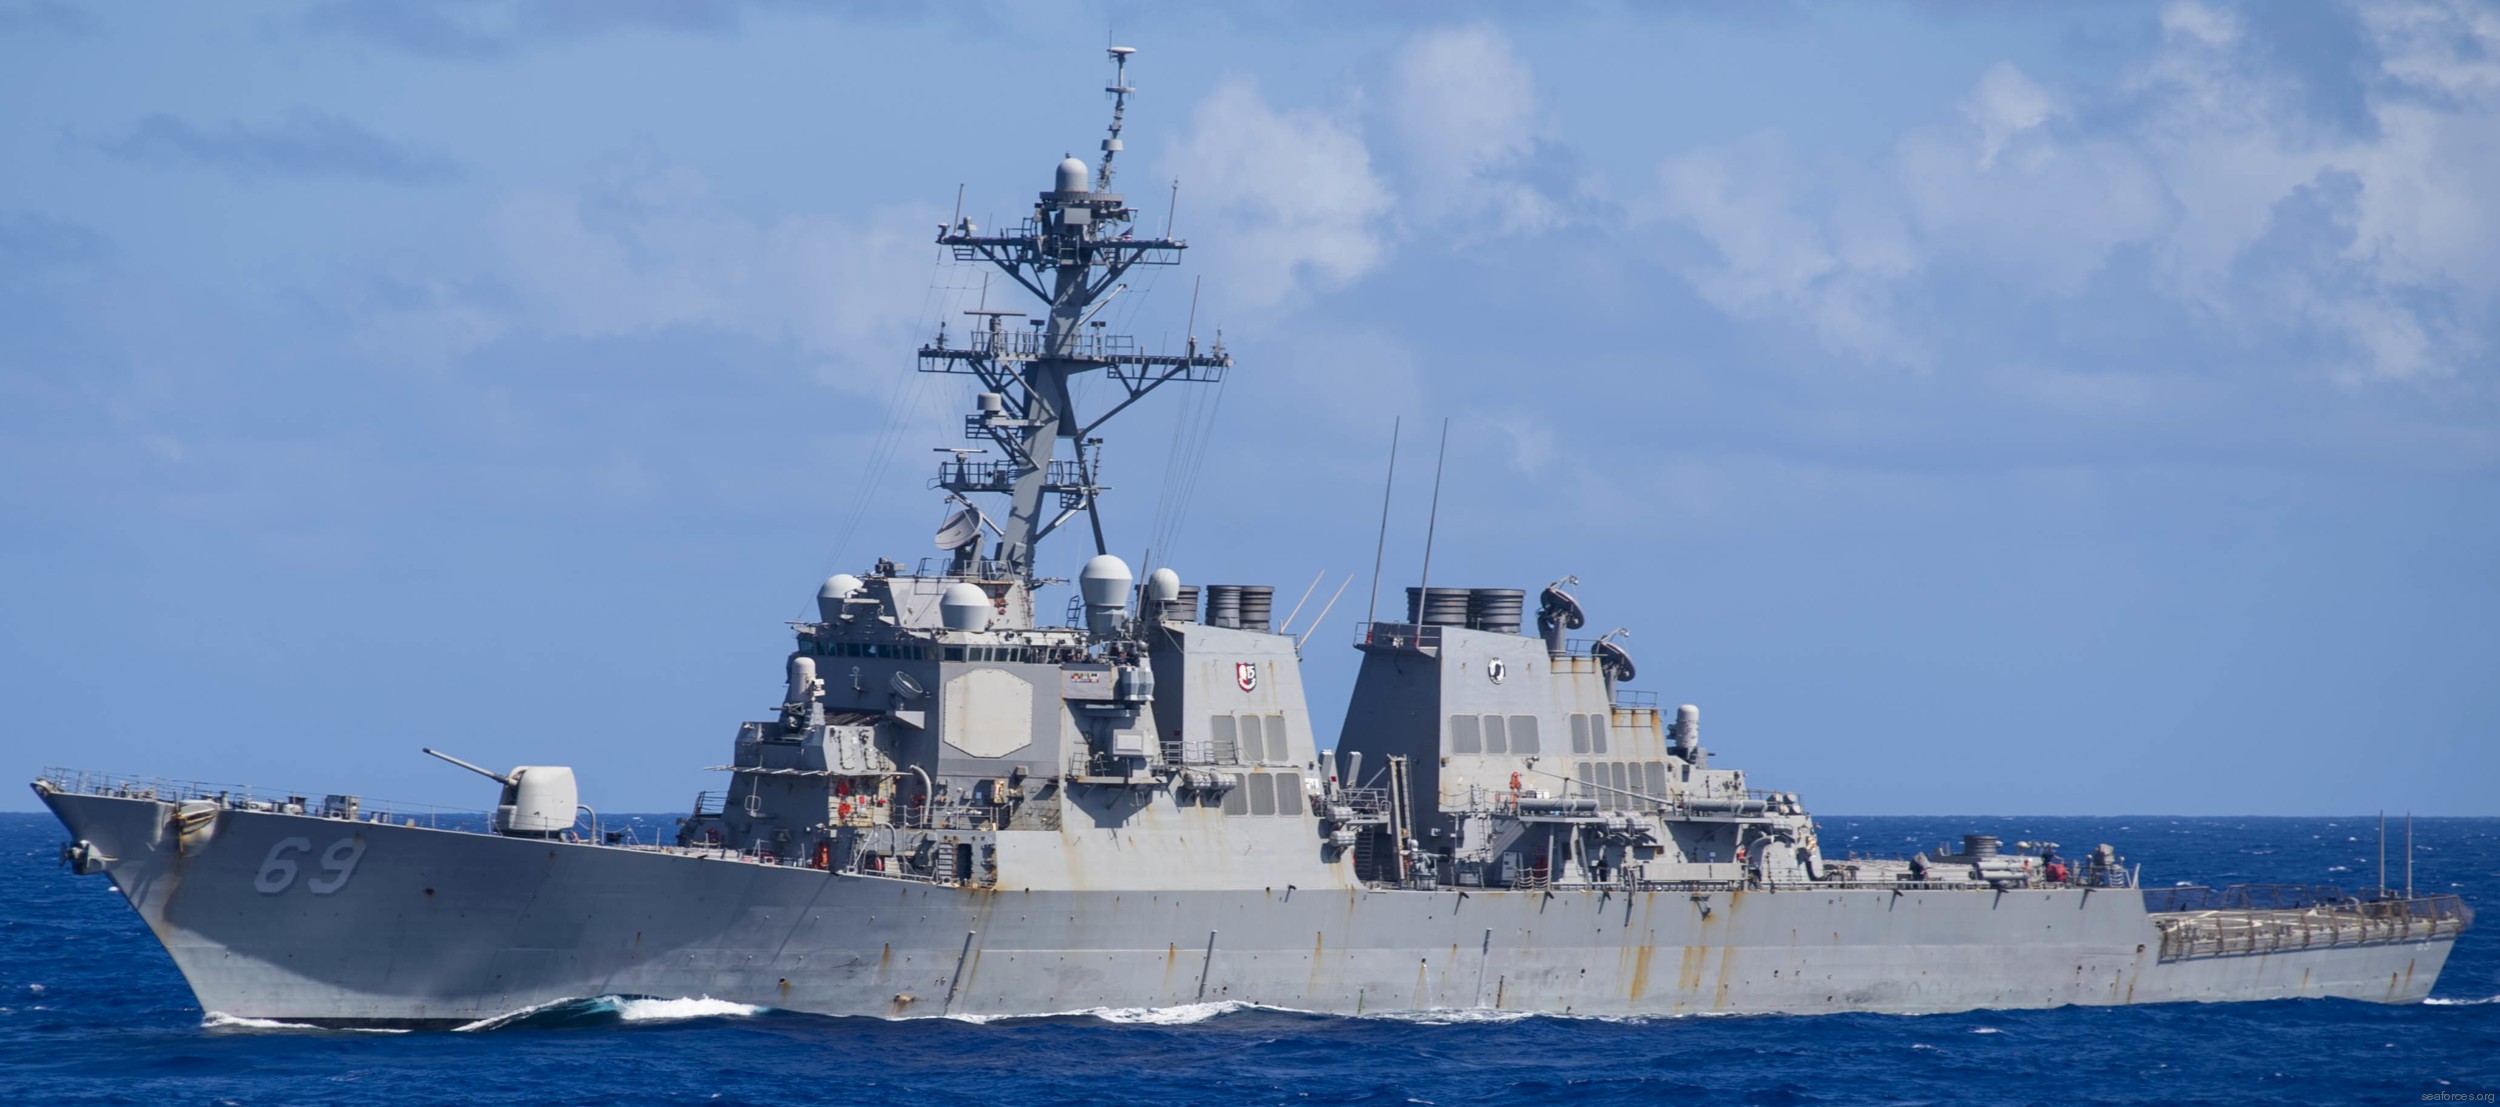 ddg-69 uss milius guided missile destroyer arleigh burke class aegis bmd 08